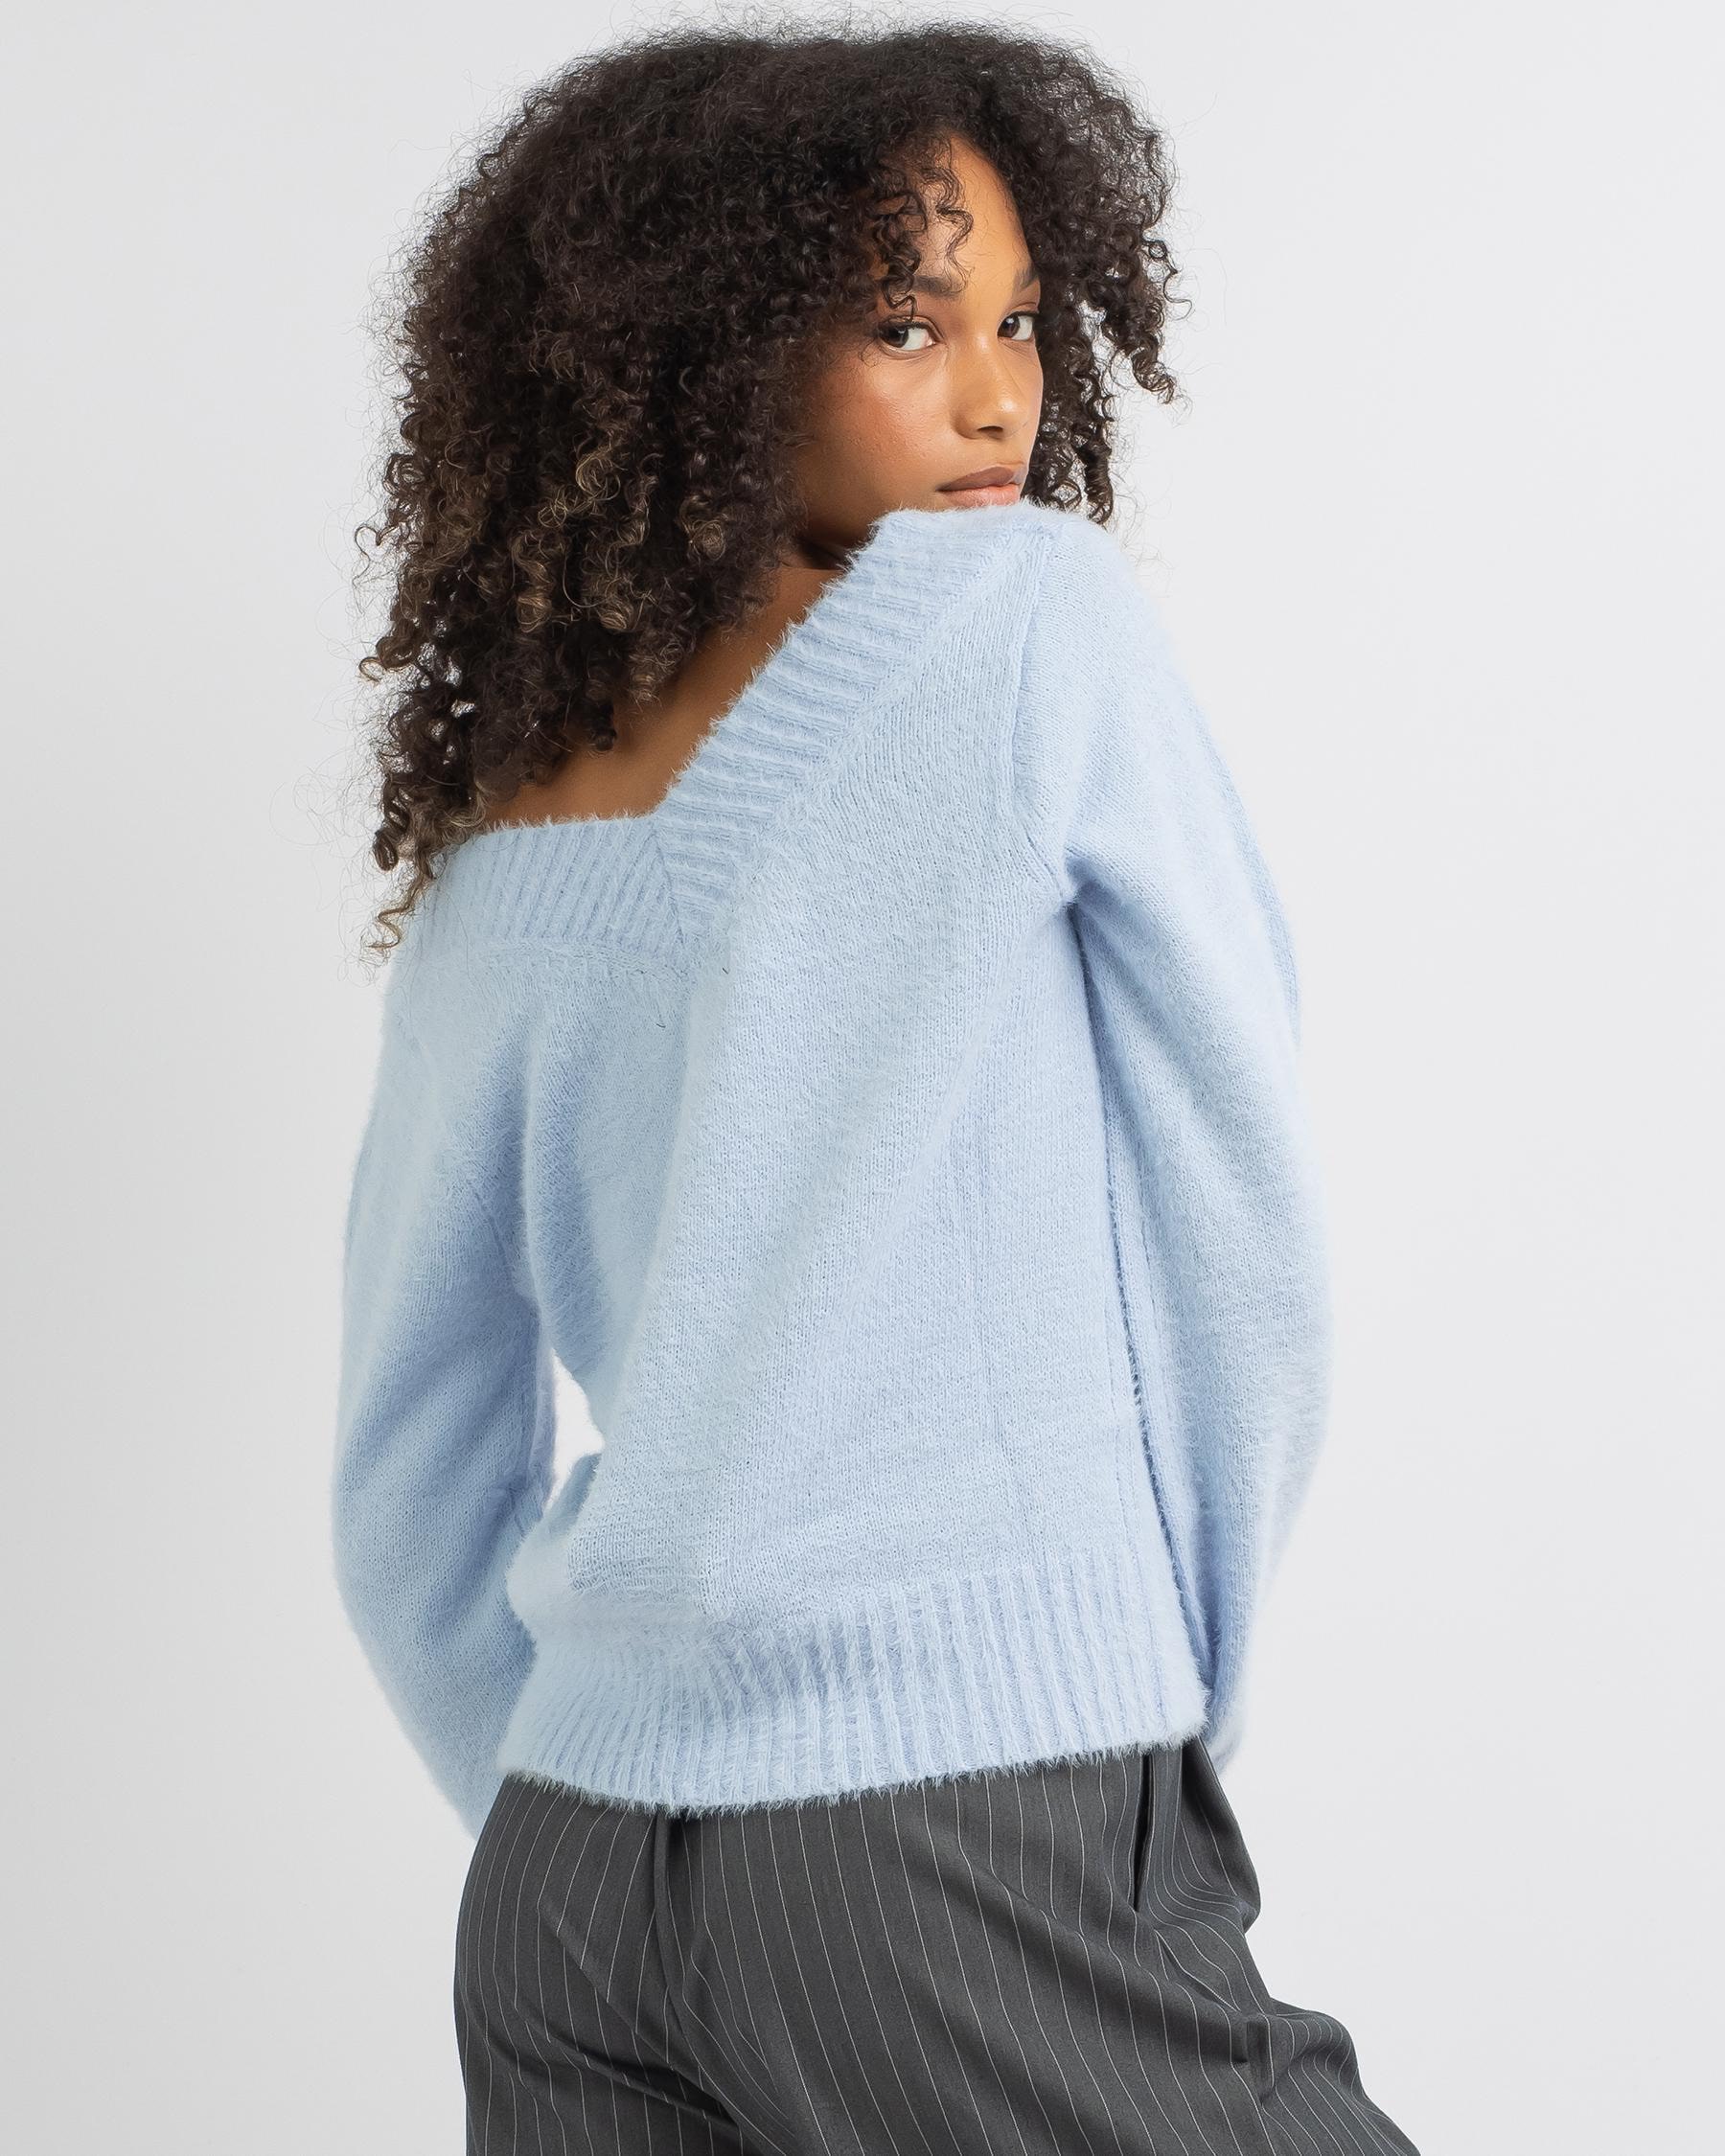 Ava And Ever Monet Knit Jumper In Pale Blue - Fast Shipping & Easy ...